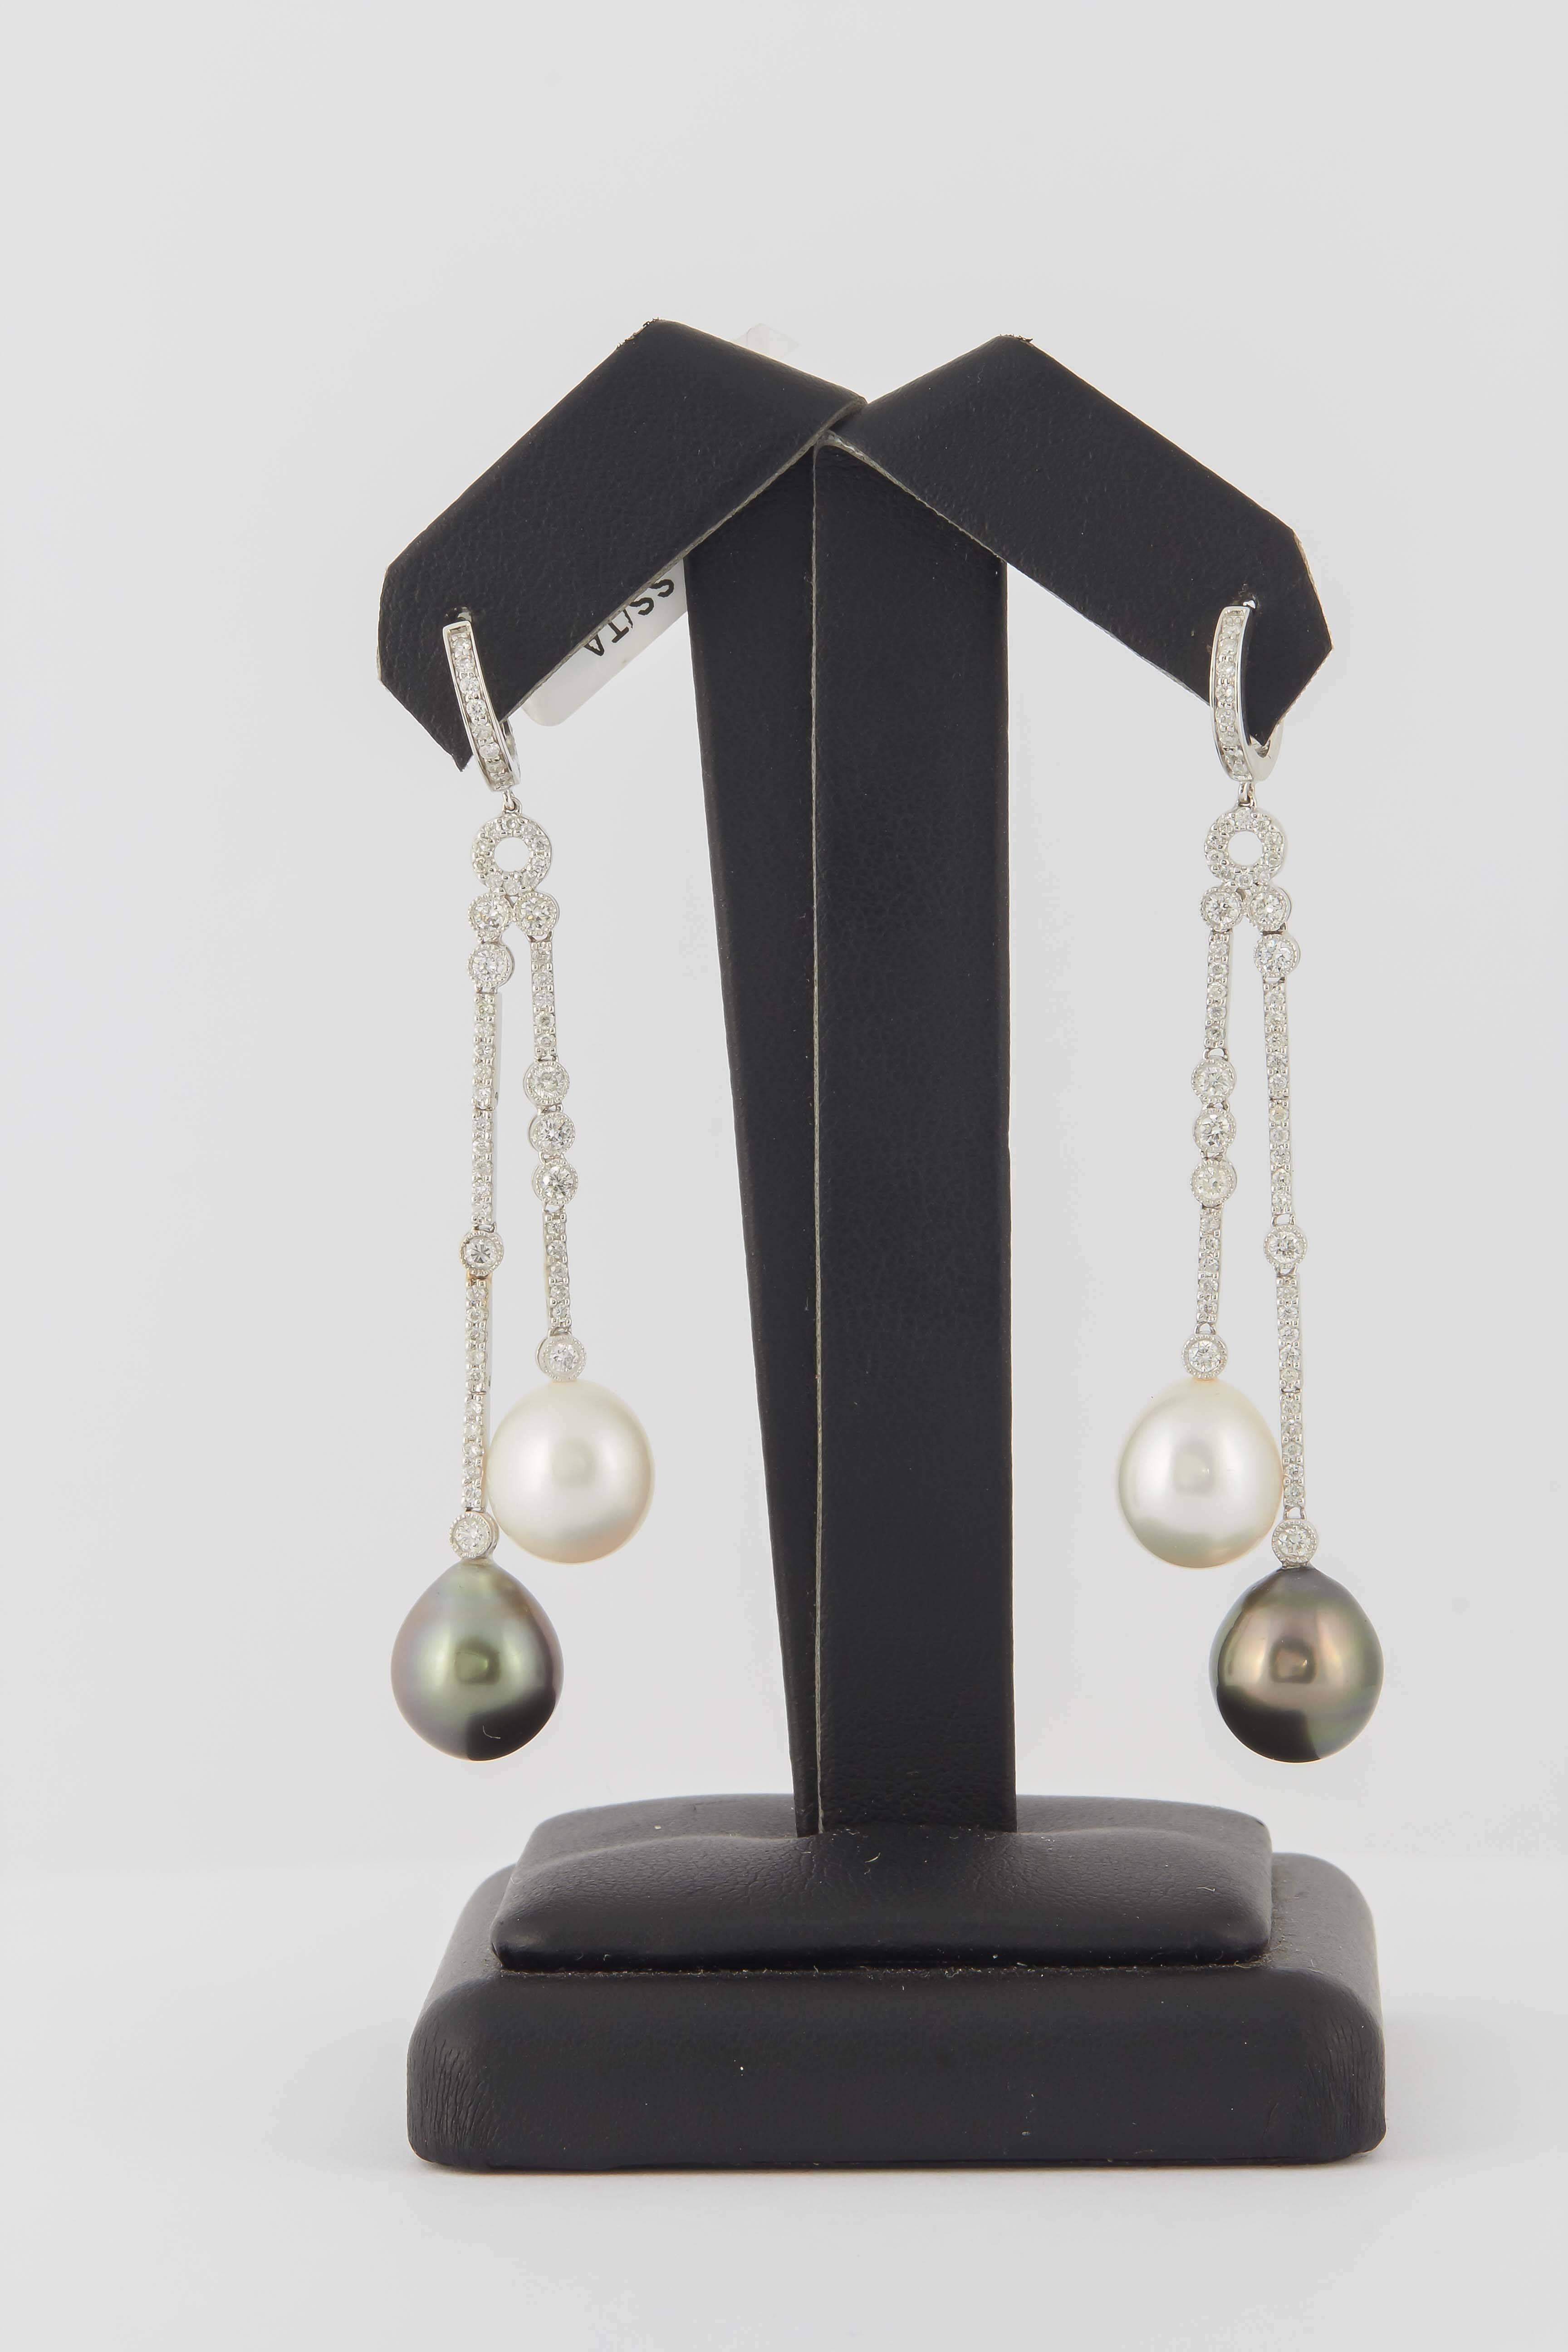 18KW 
5.6 g.
South Sea and Tahitian pearl 10-11 mm
114 Diamonds
1.07 Cts.